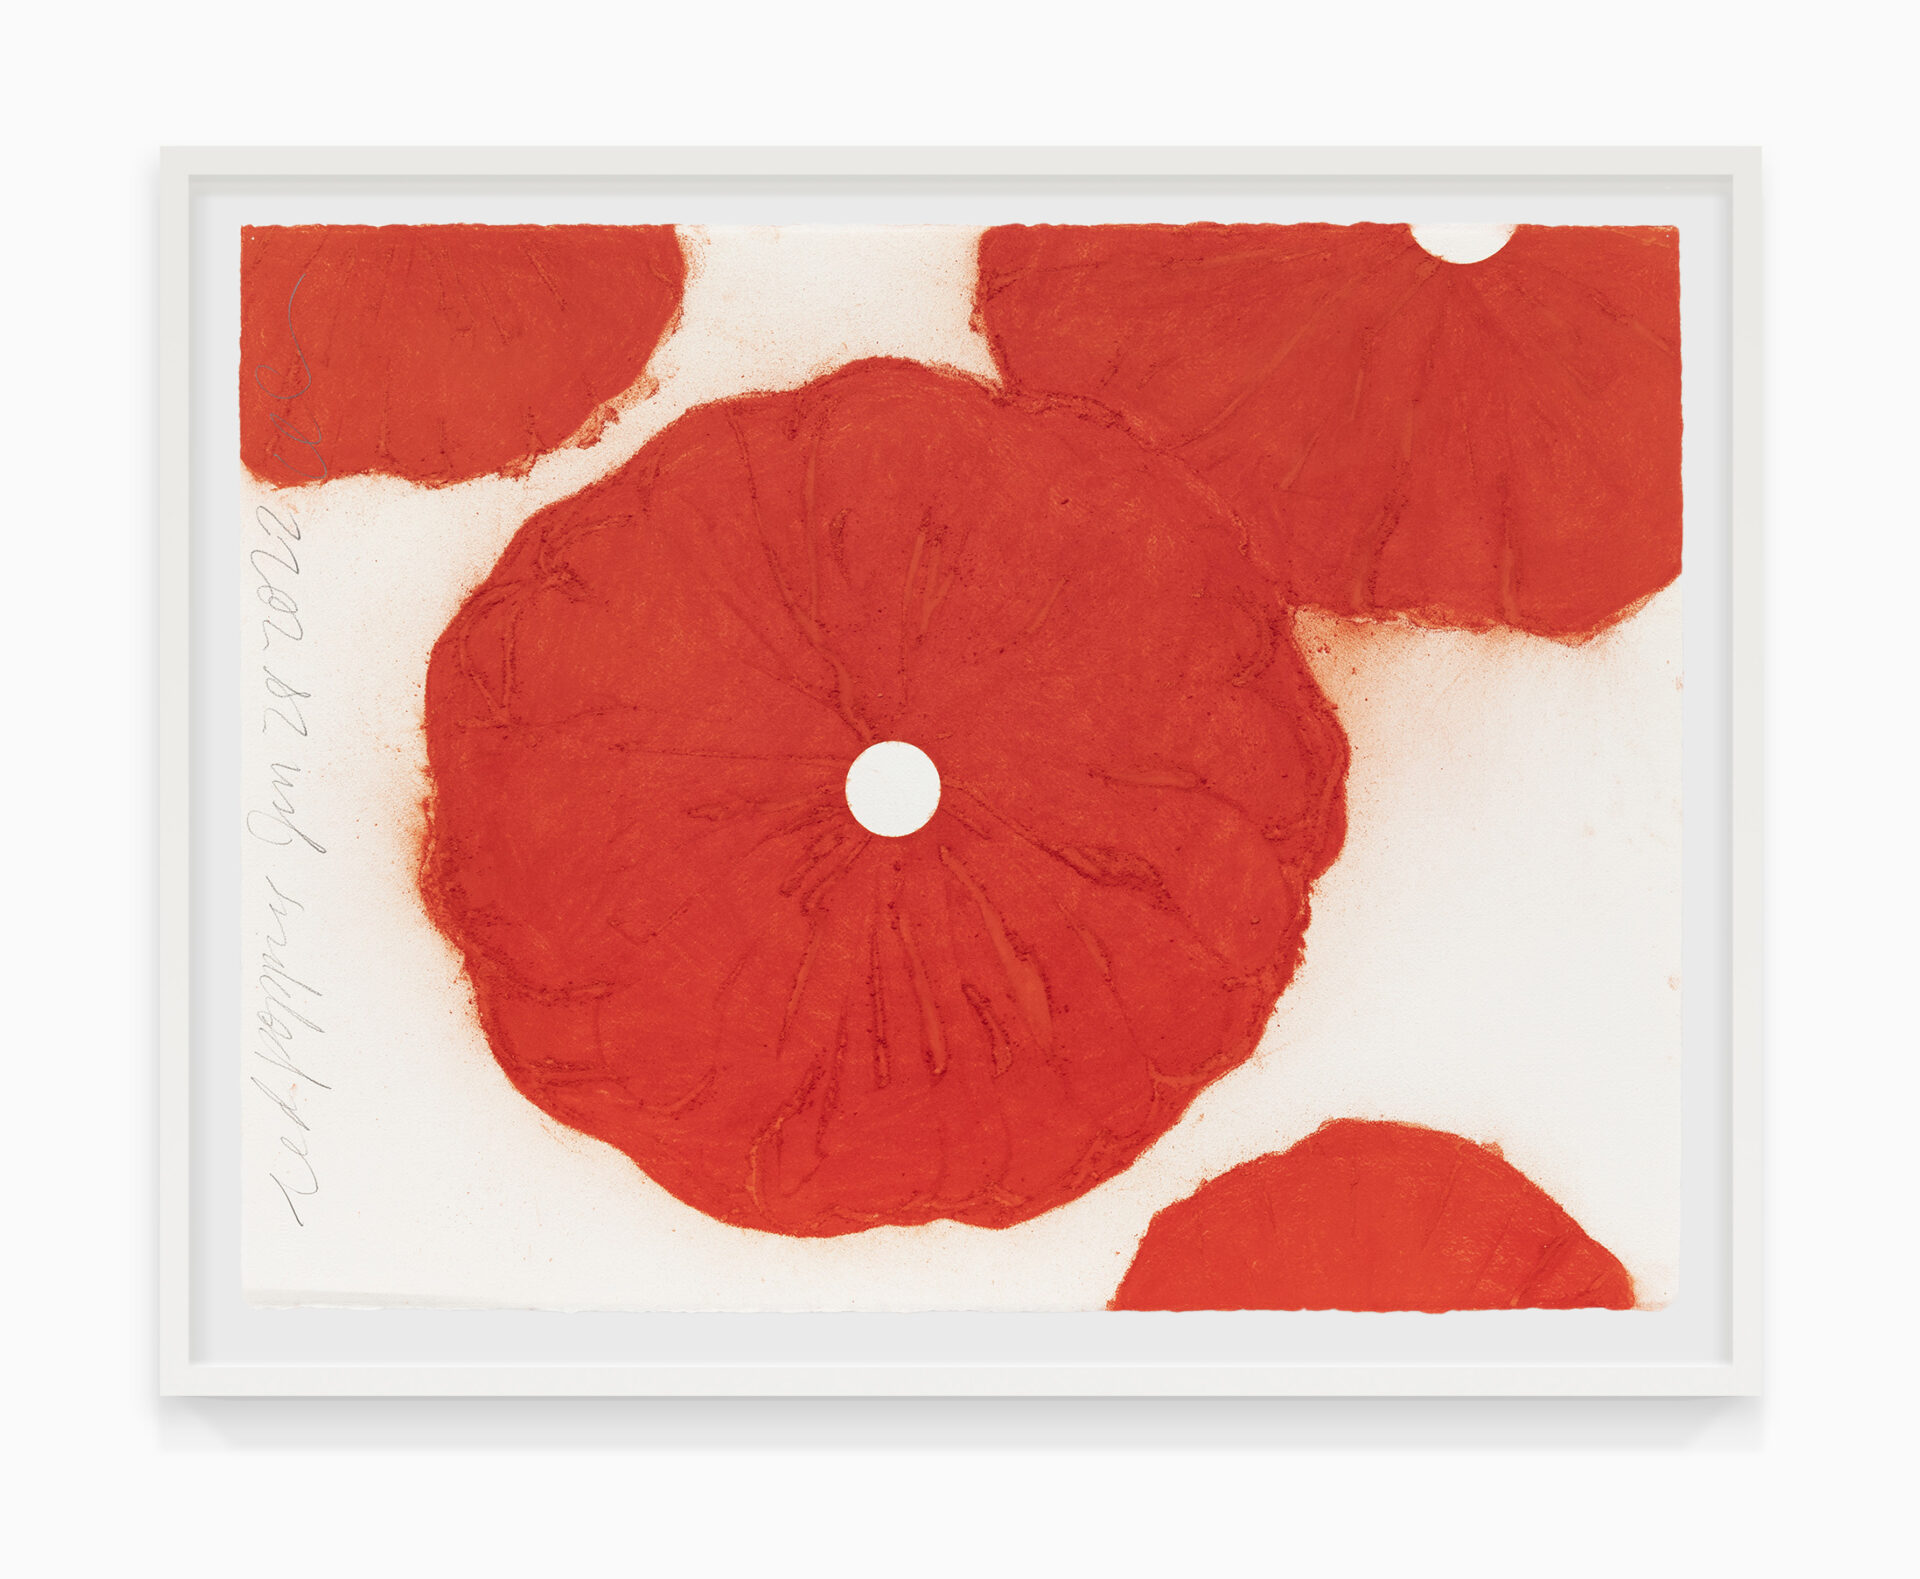 Donald Sultan Red Poppies, Jan 28 2022, 2022 Conte on paper Paper Dimensions: 22 1/2 x 30 inches (57.2 x 76.2 cm) Framed Dimensions: 26 x 33 1/2 x 1 3/4 inches (66 x 85.1 x 4.4 cm)